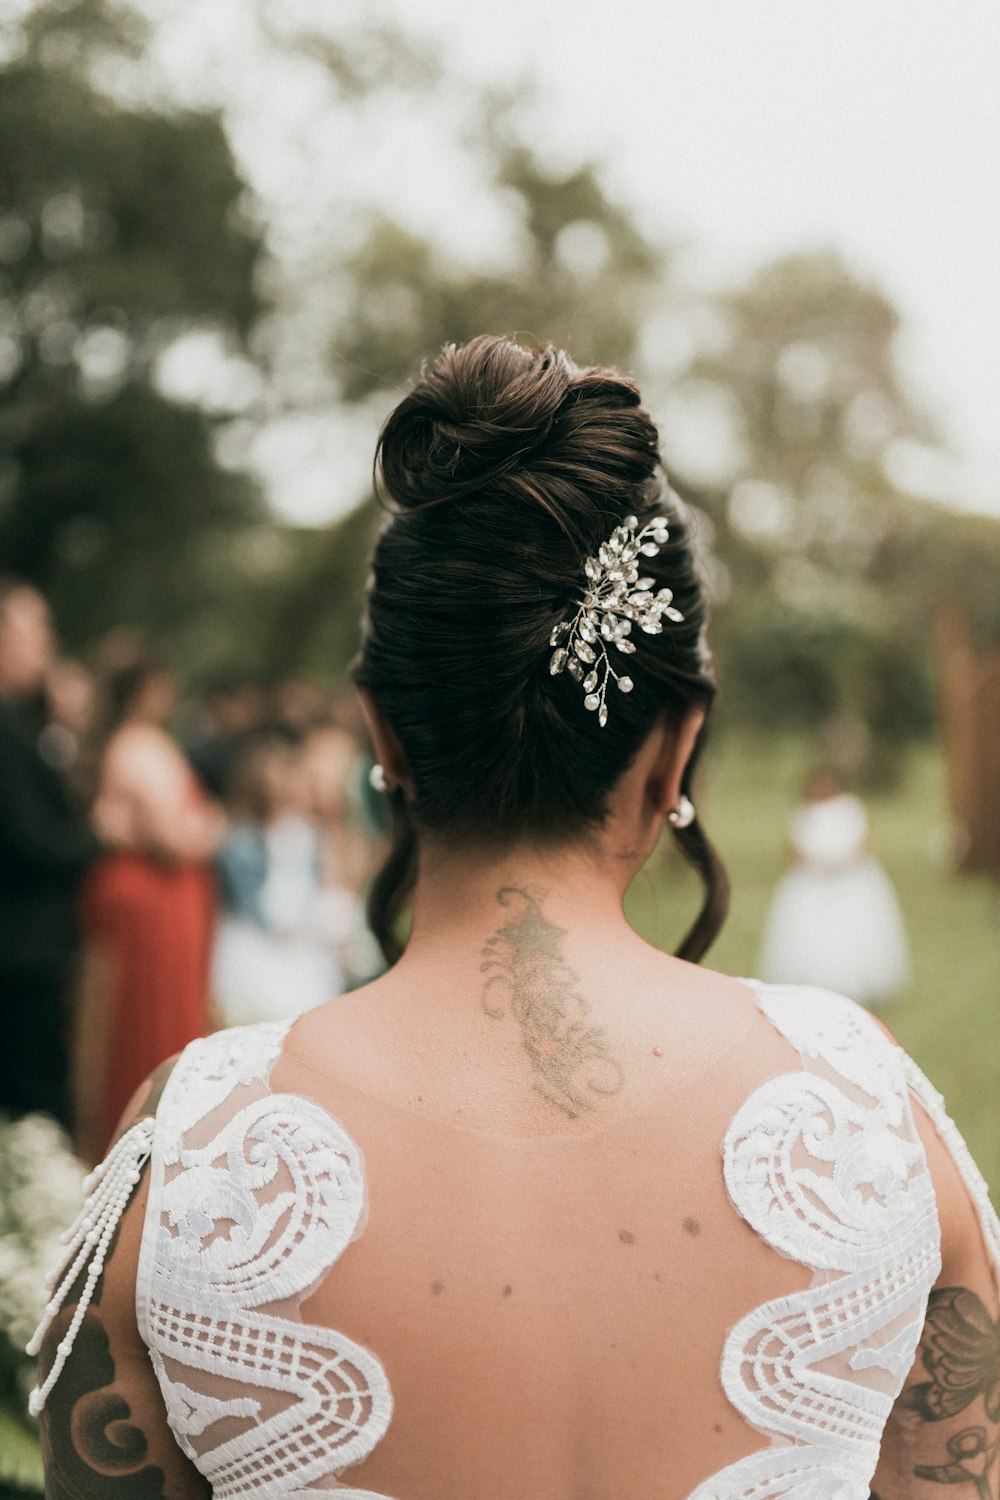 a woman with a tattoo on her back